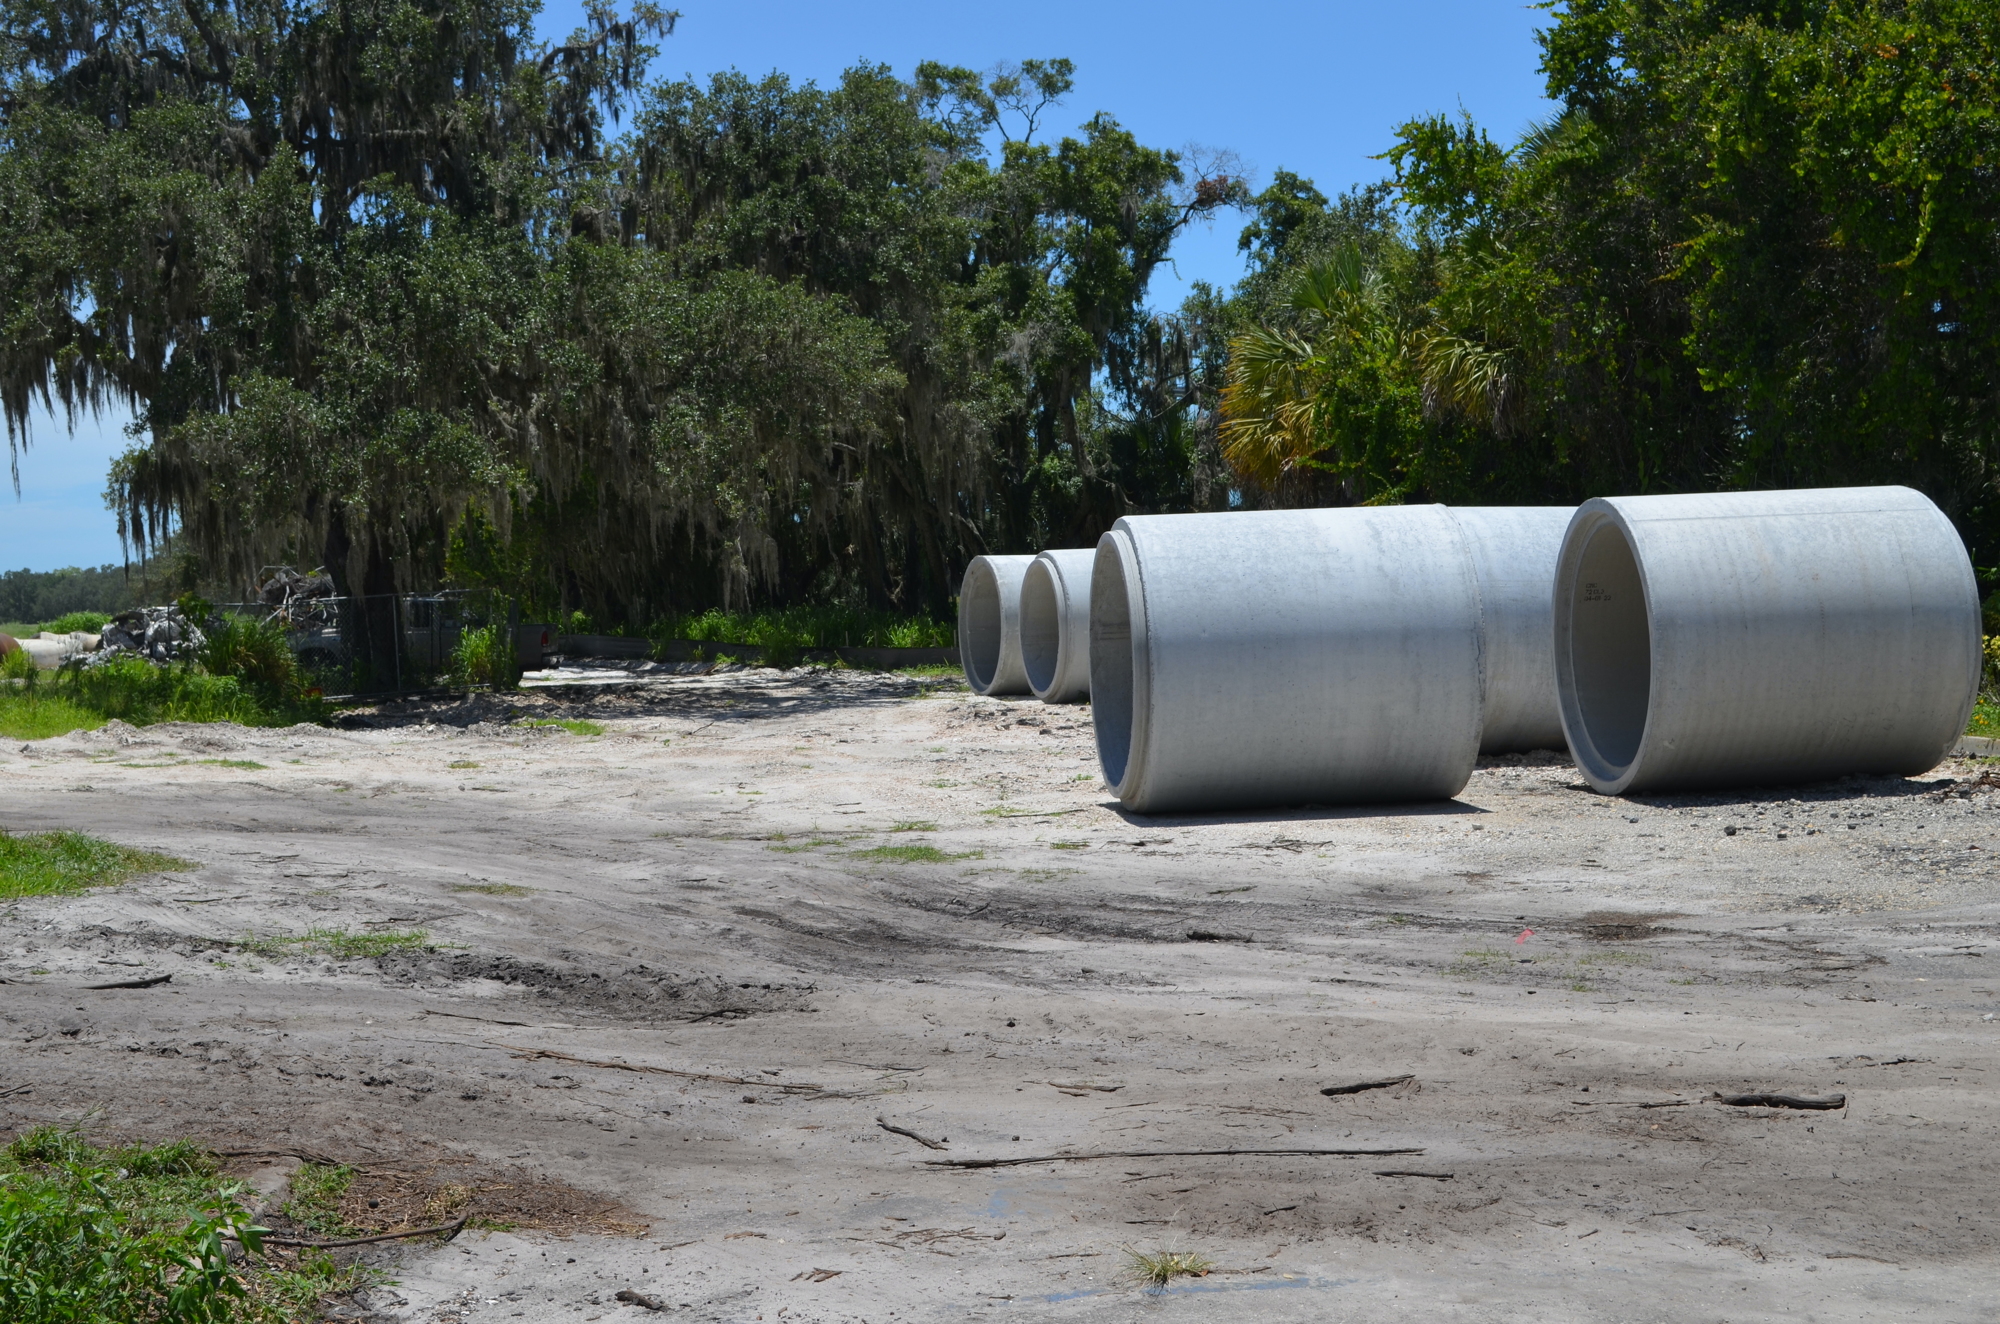 Large culverts await installation as part of the drainage improvements at the Bobby Jones Golf Complex. (Photo by Andrew Warfield)